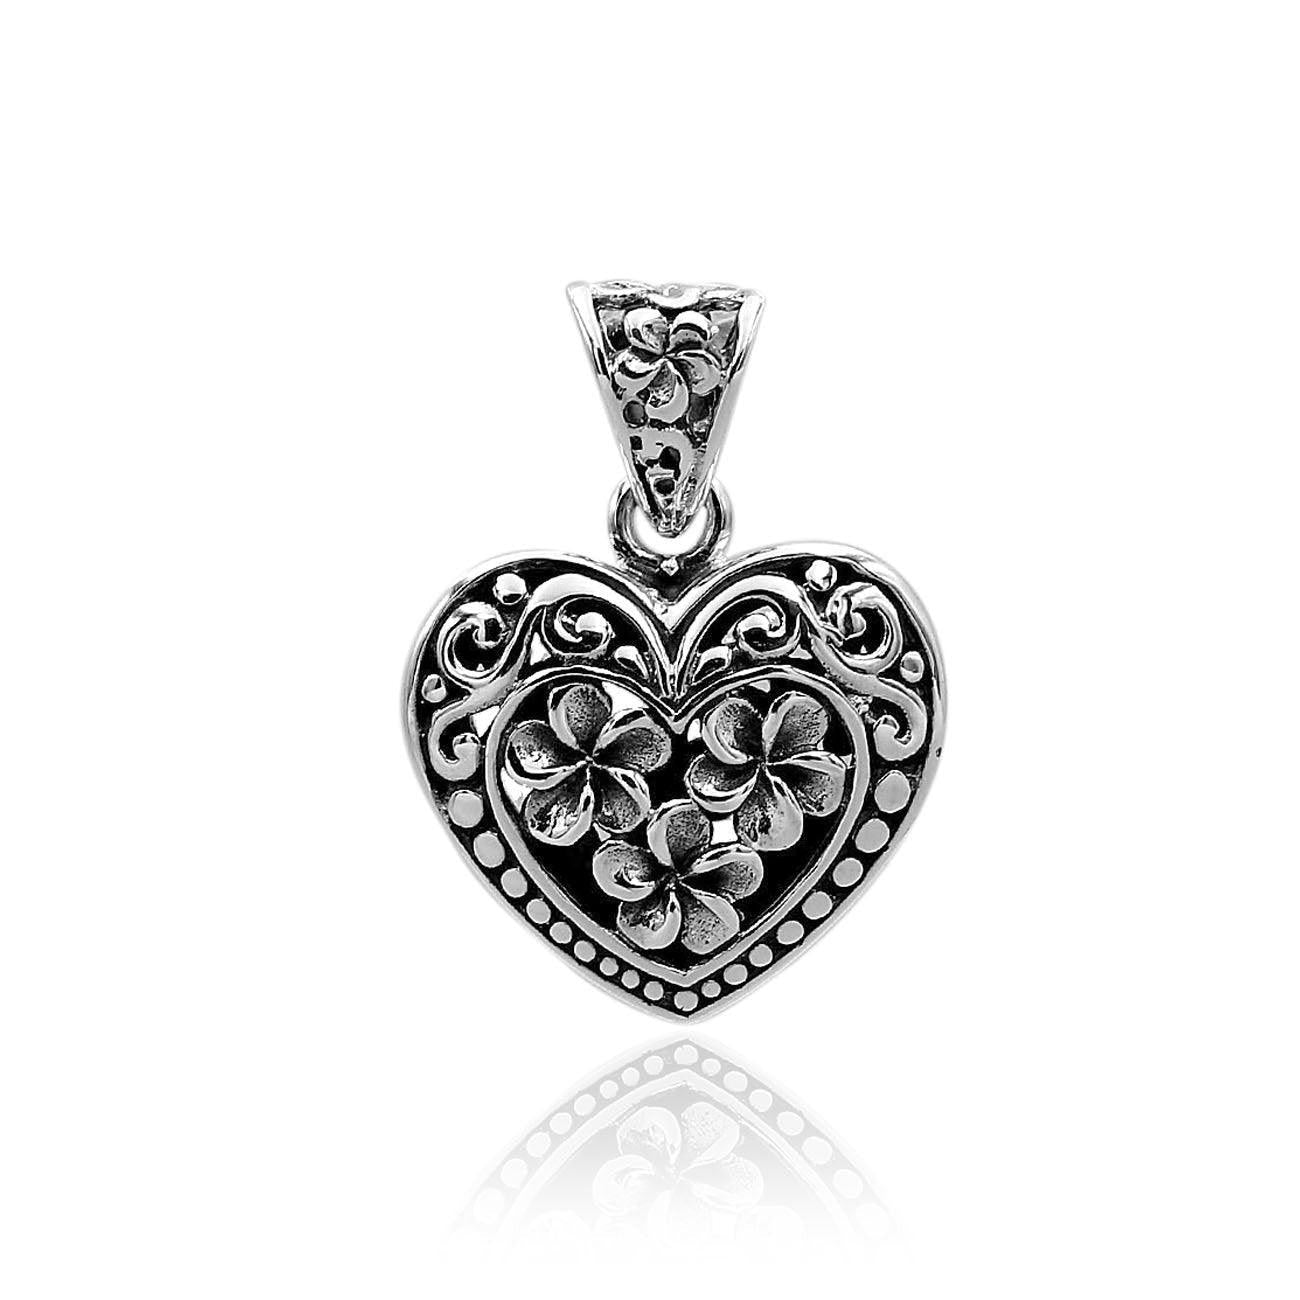 Handmade Floral HEART Charm Pendant Necklace in 925 Sterling Silver With Chain - 3.3 Cm - Inspiring Jewellery